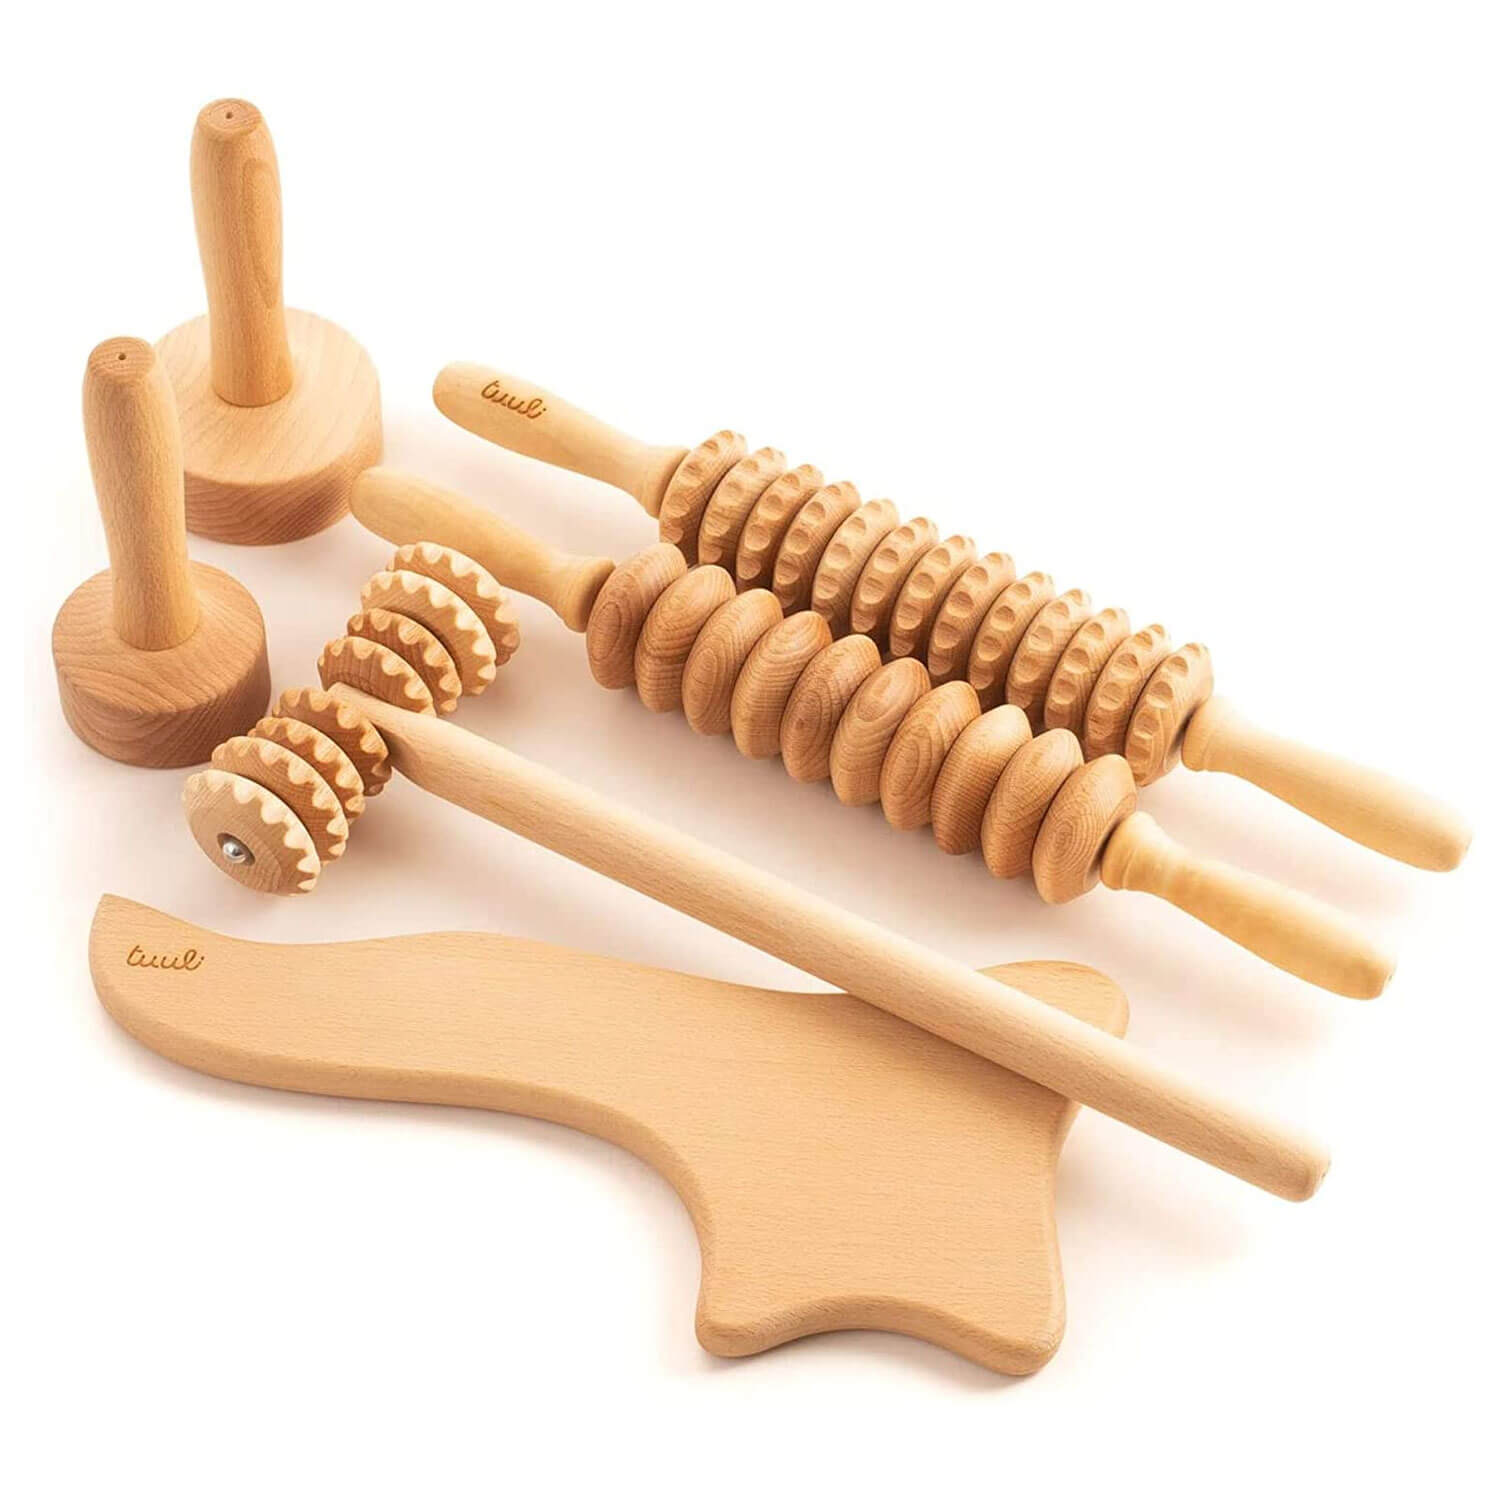 https://cdn.shopify.com/s/files/1/0515/2440/3381/products/6-piece-wooden-massager-set-maderotherapy-roller-paddle-cup-cellulite-lymphatic-drainage-204.jpg